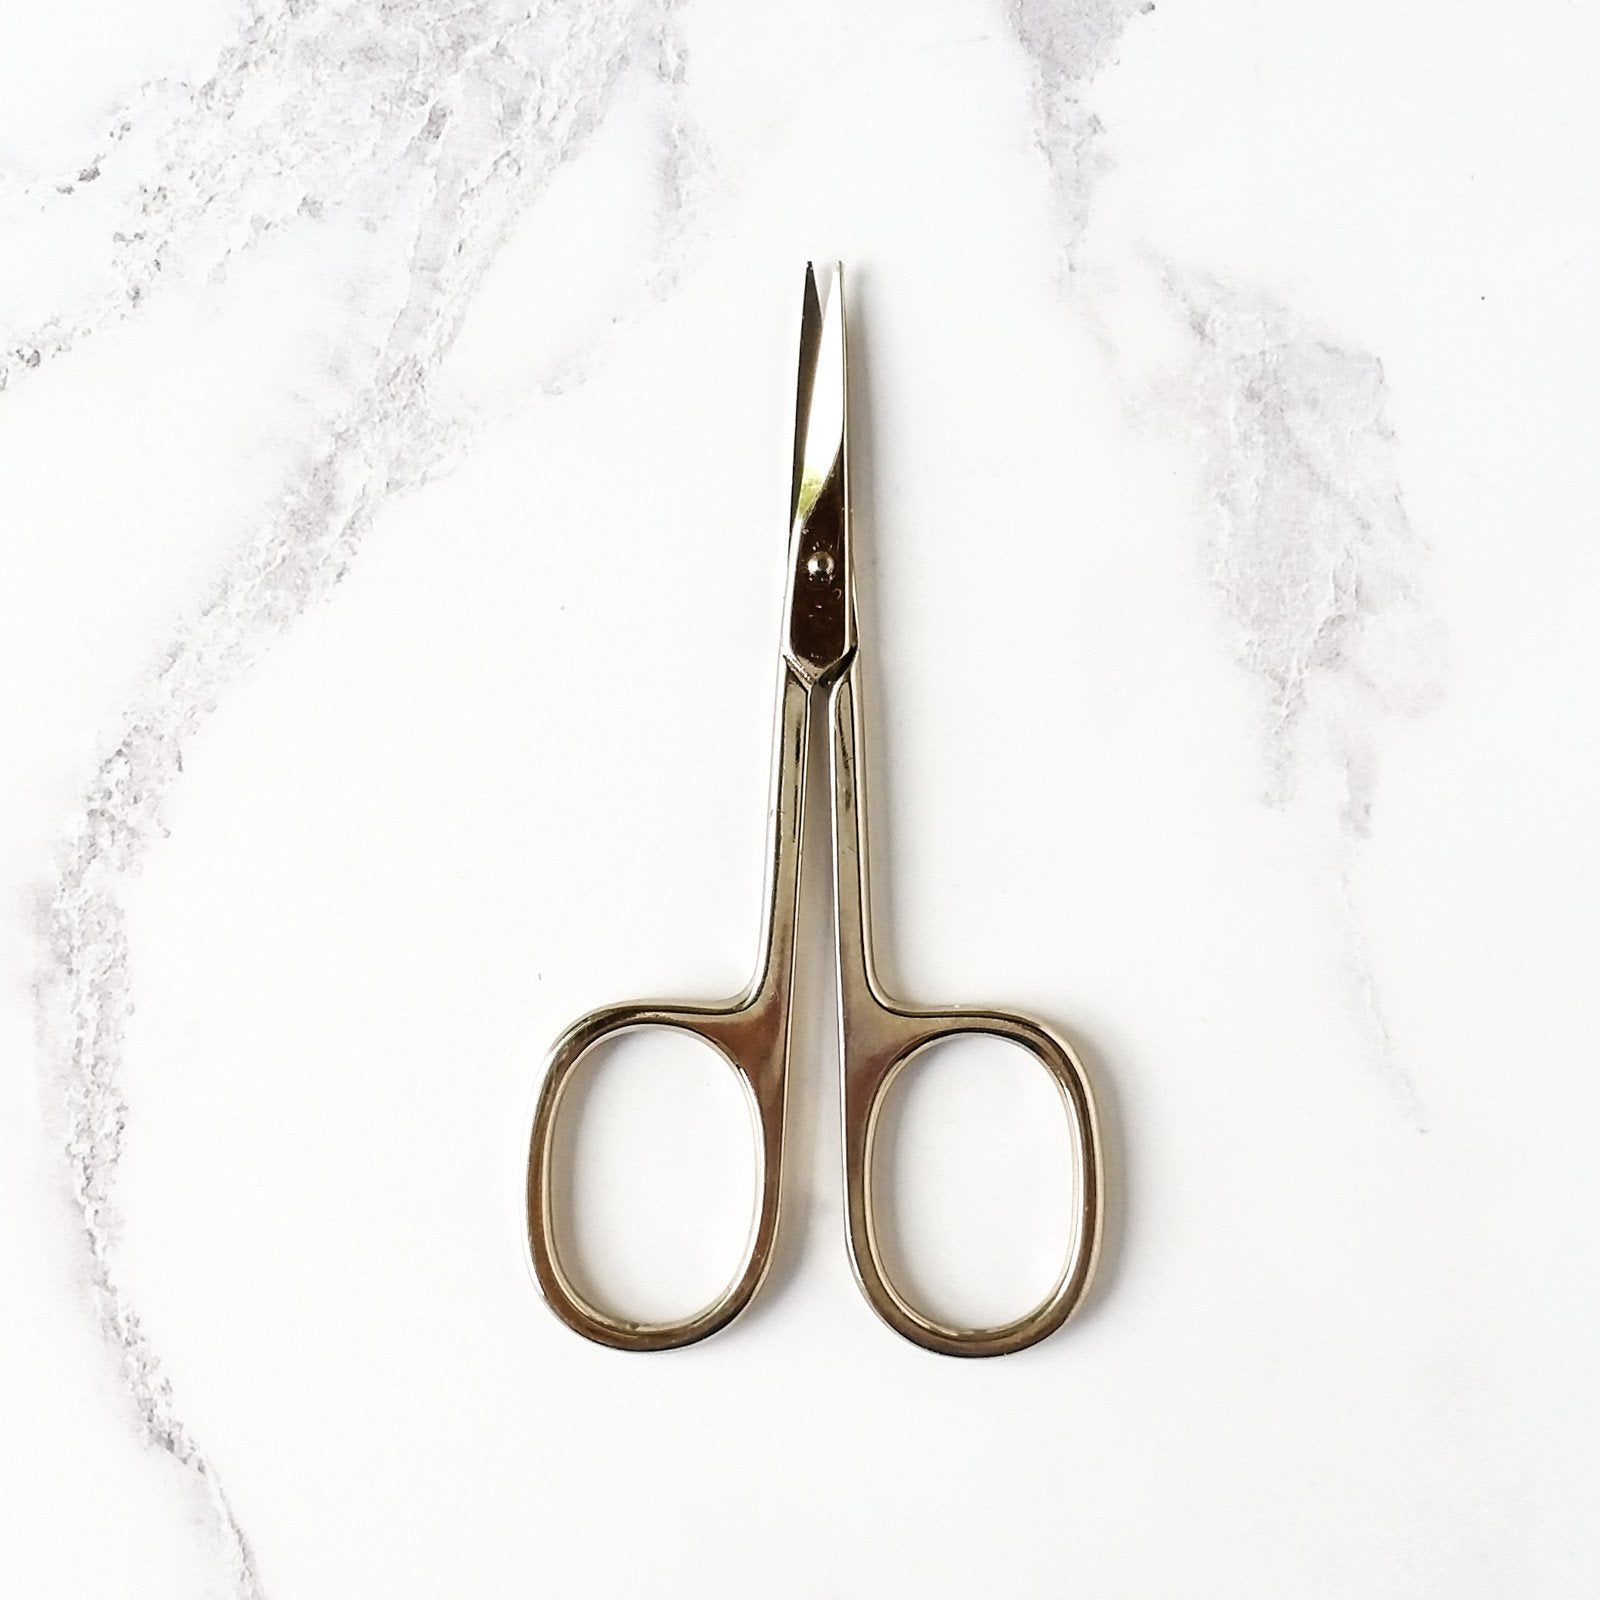 Embroidery, Nail, Cuticle Stainless Left Handed Scissors